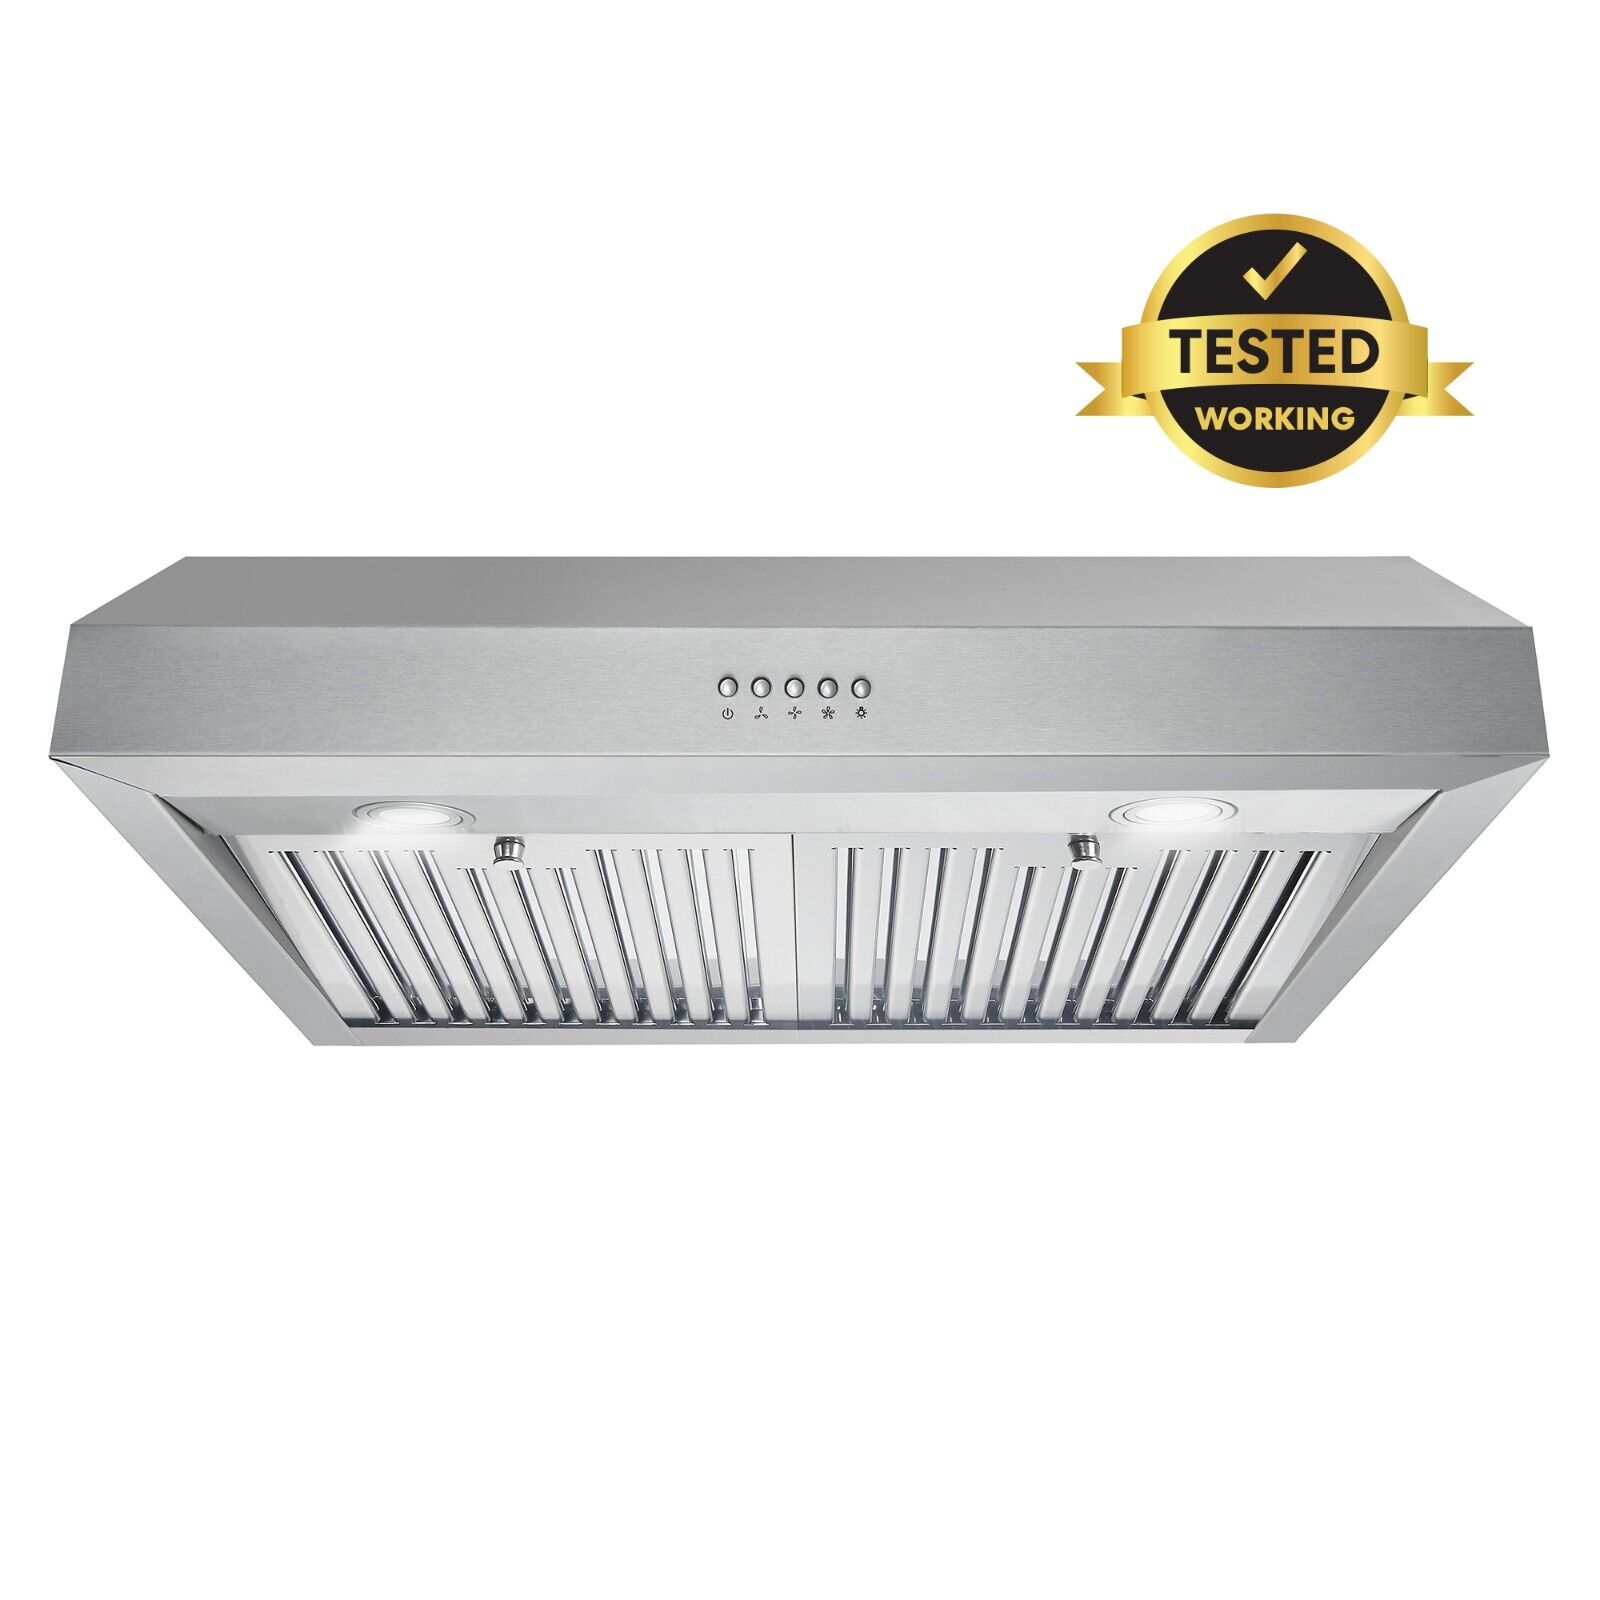 30 in Under Cabinet Range Hood (OPEN BOX) Stainless Steel, Washable Filters, LED